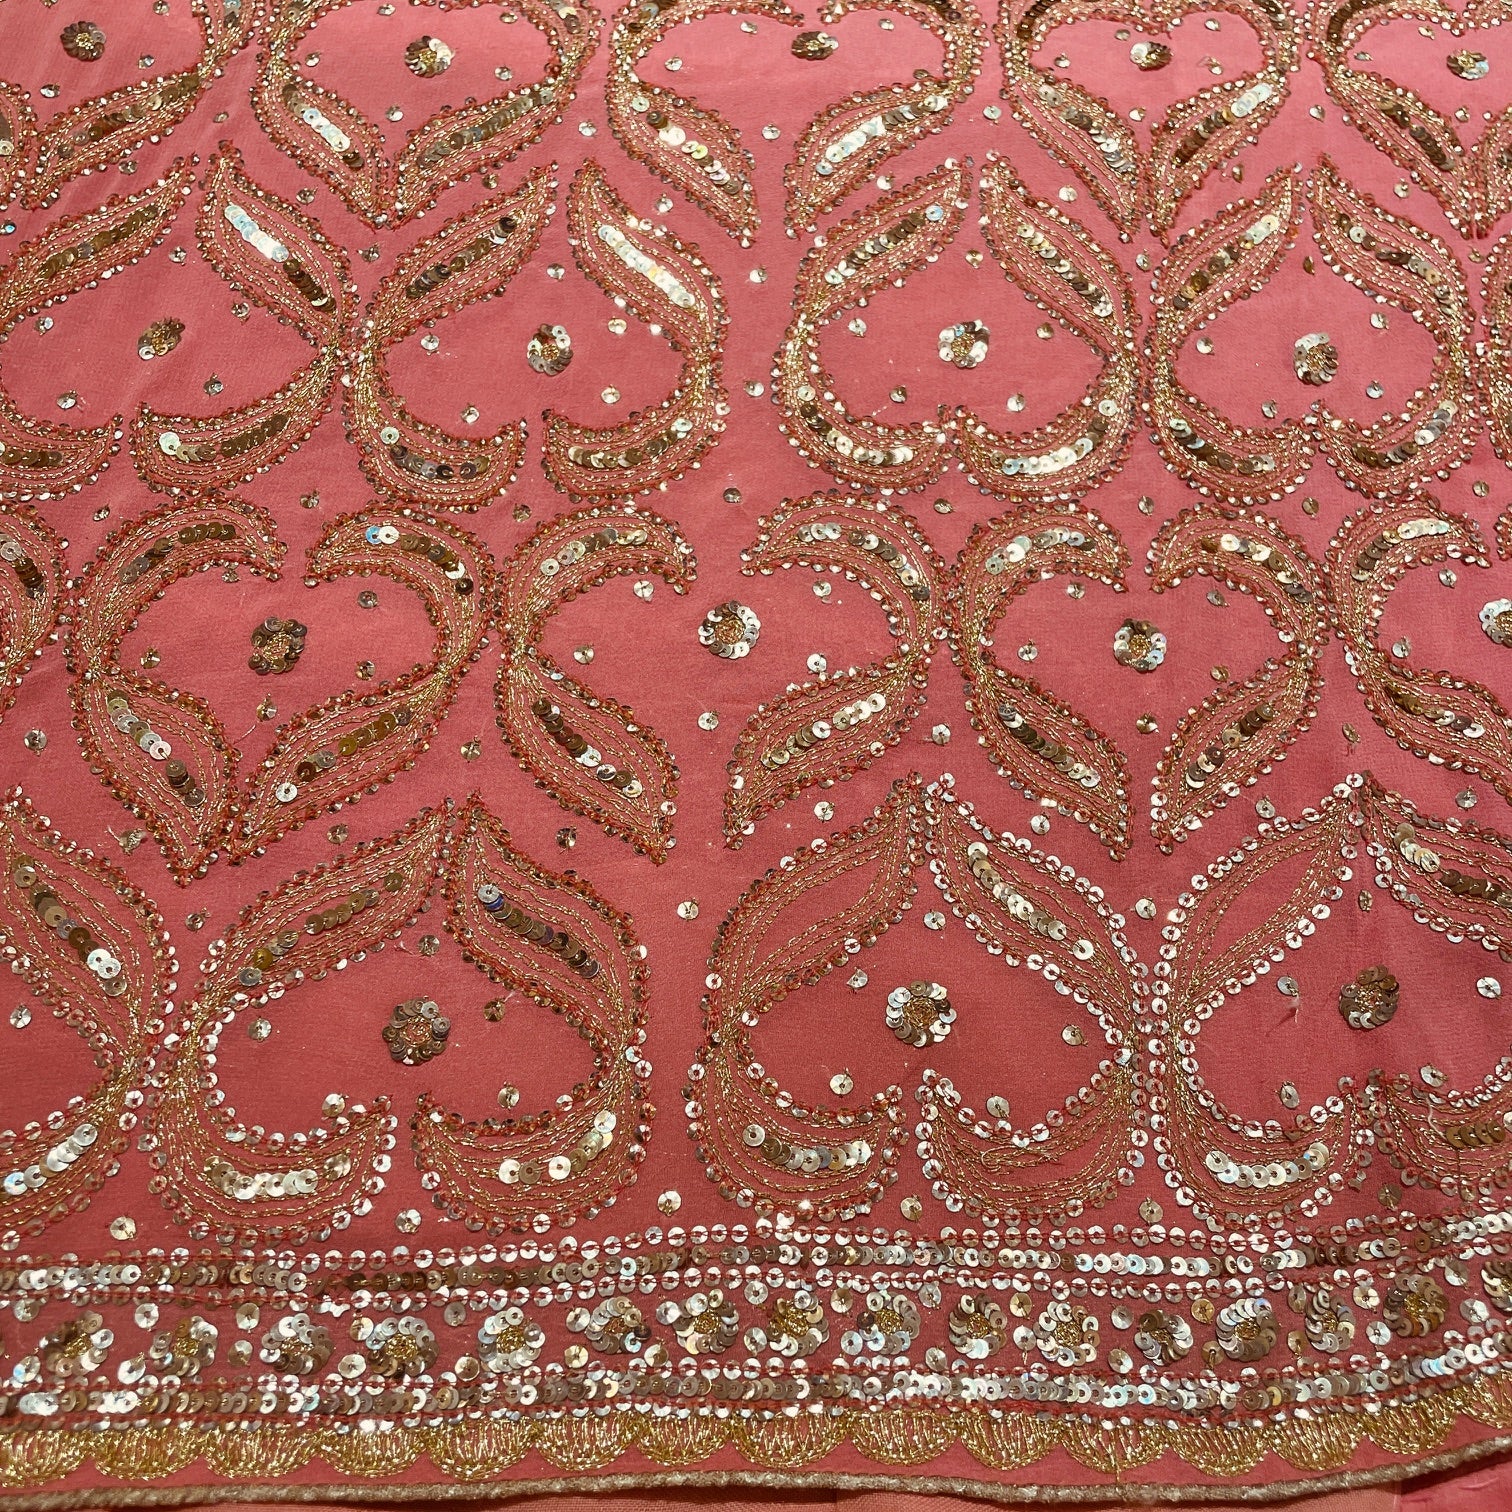 Blush Pink Heavily Embroidered Saree - Vintage India NYC